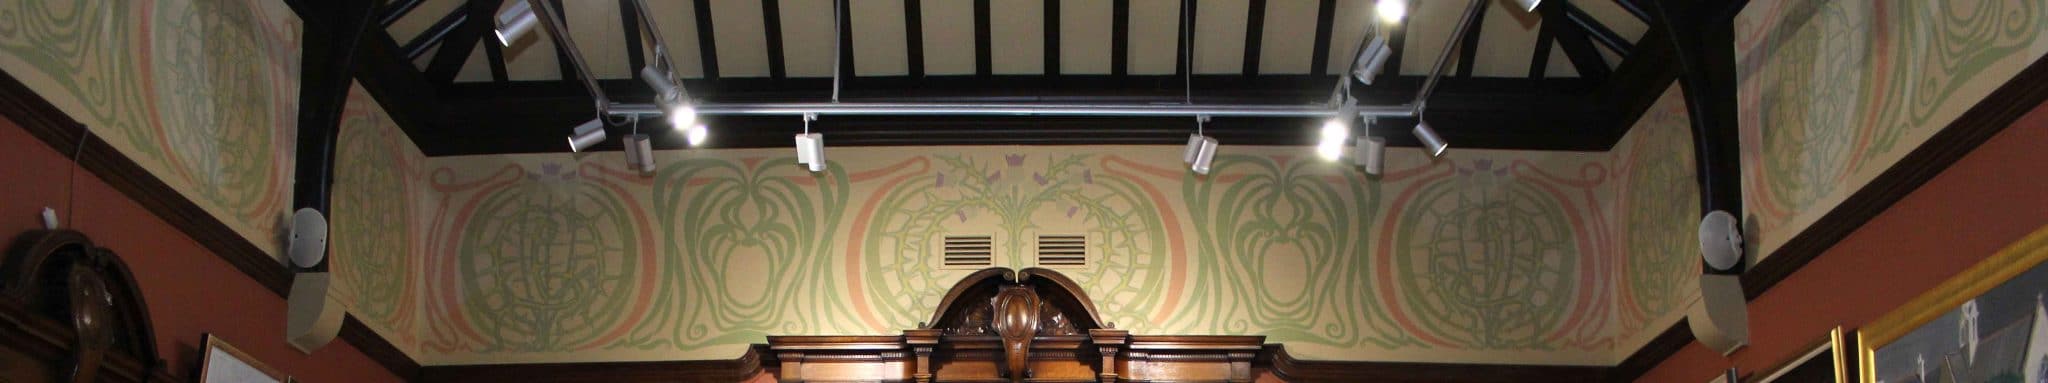 The Charles Rennie Macintosh frieze in the Gallery at the Glasgow Art Club 